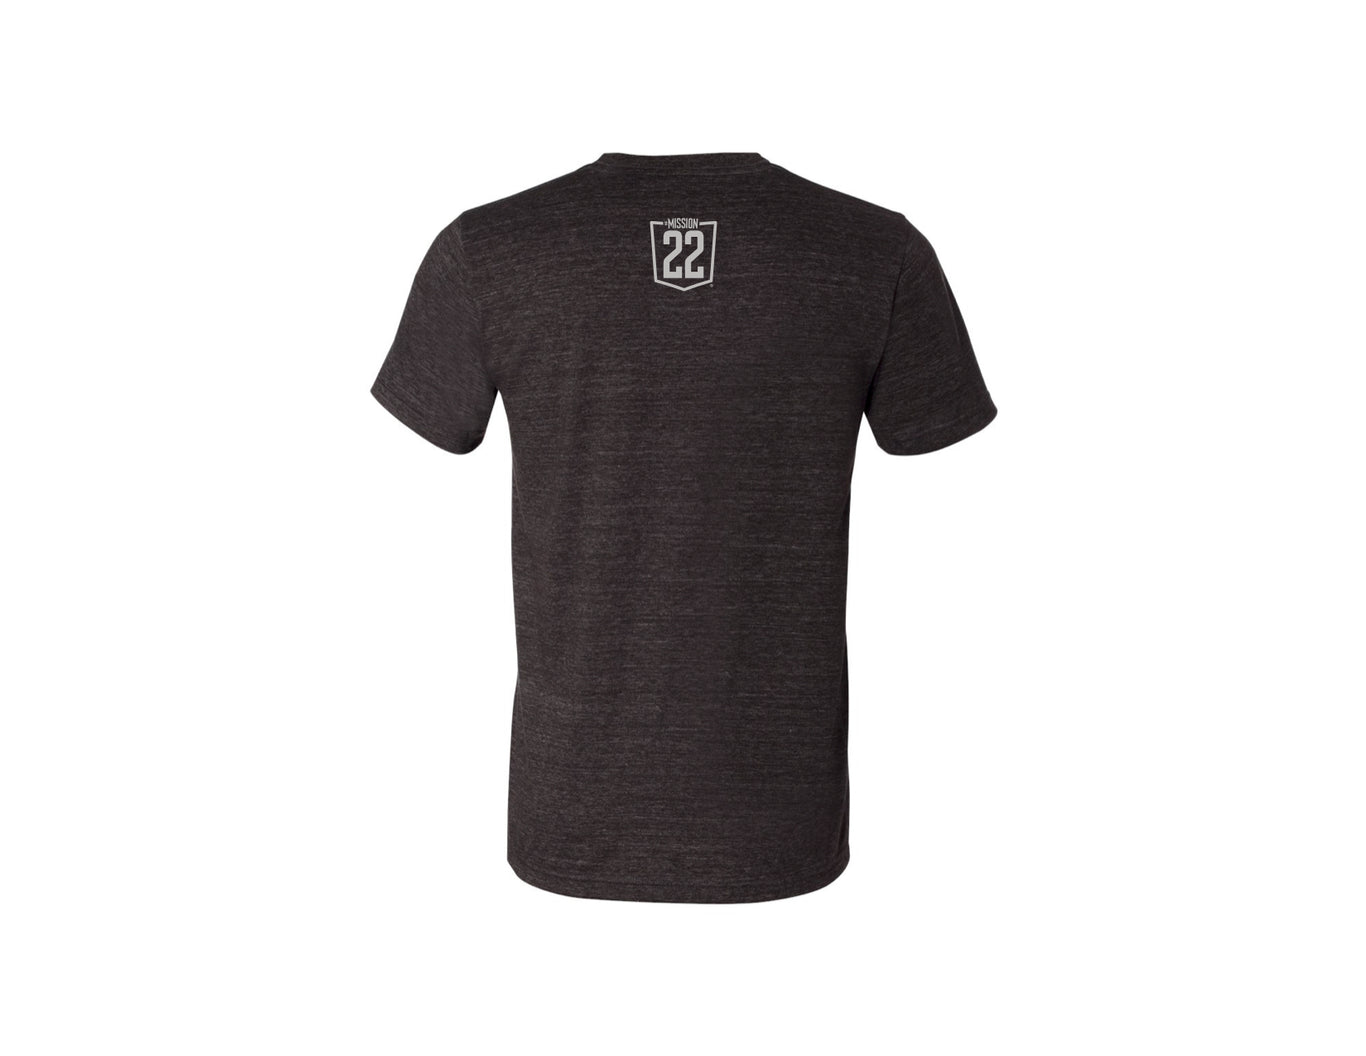 Mission 22 Charcoal Tee | Mission 22